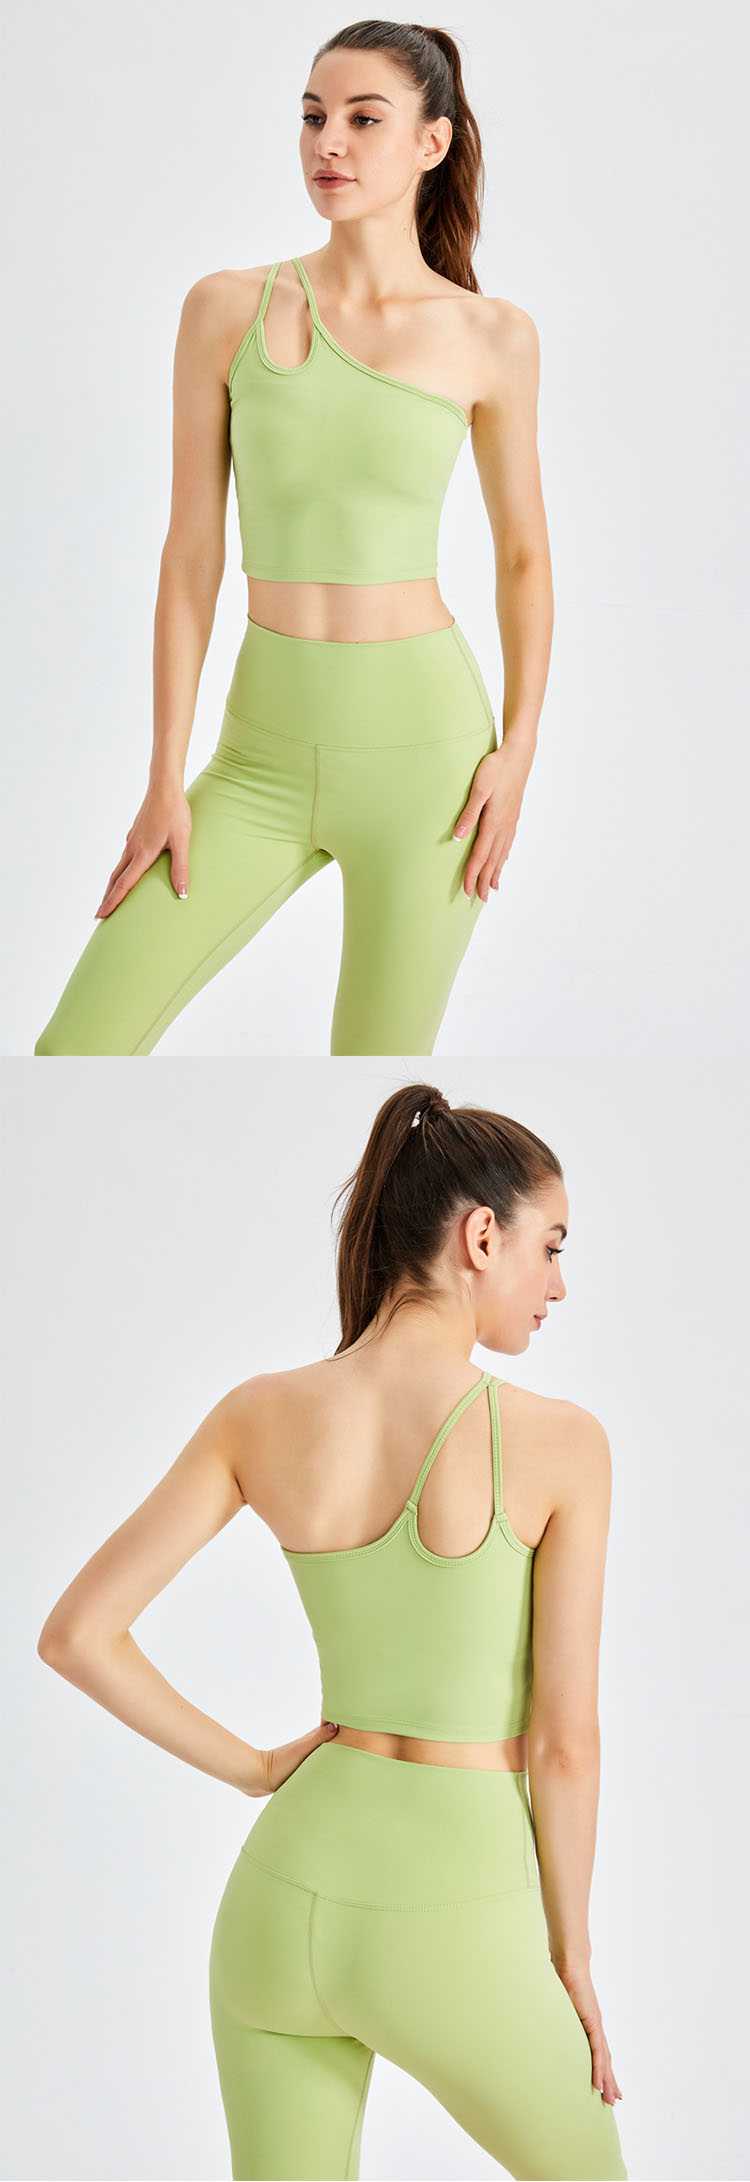 thin shoulder straps can add new ideas to the 23 spring and summer sports underwear.